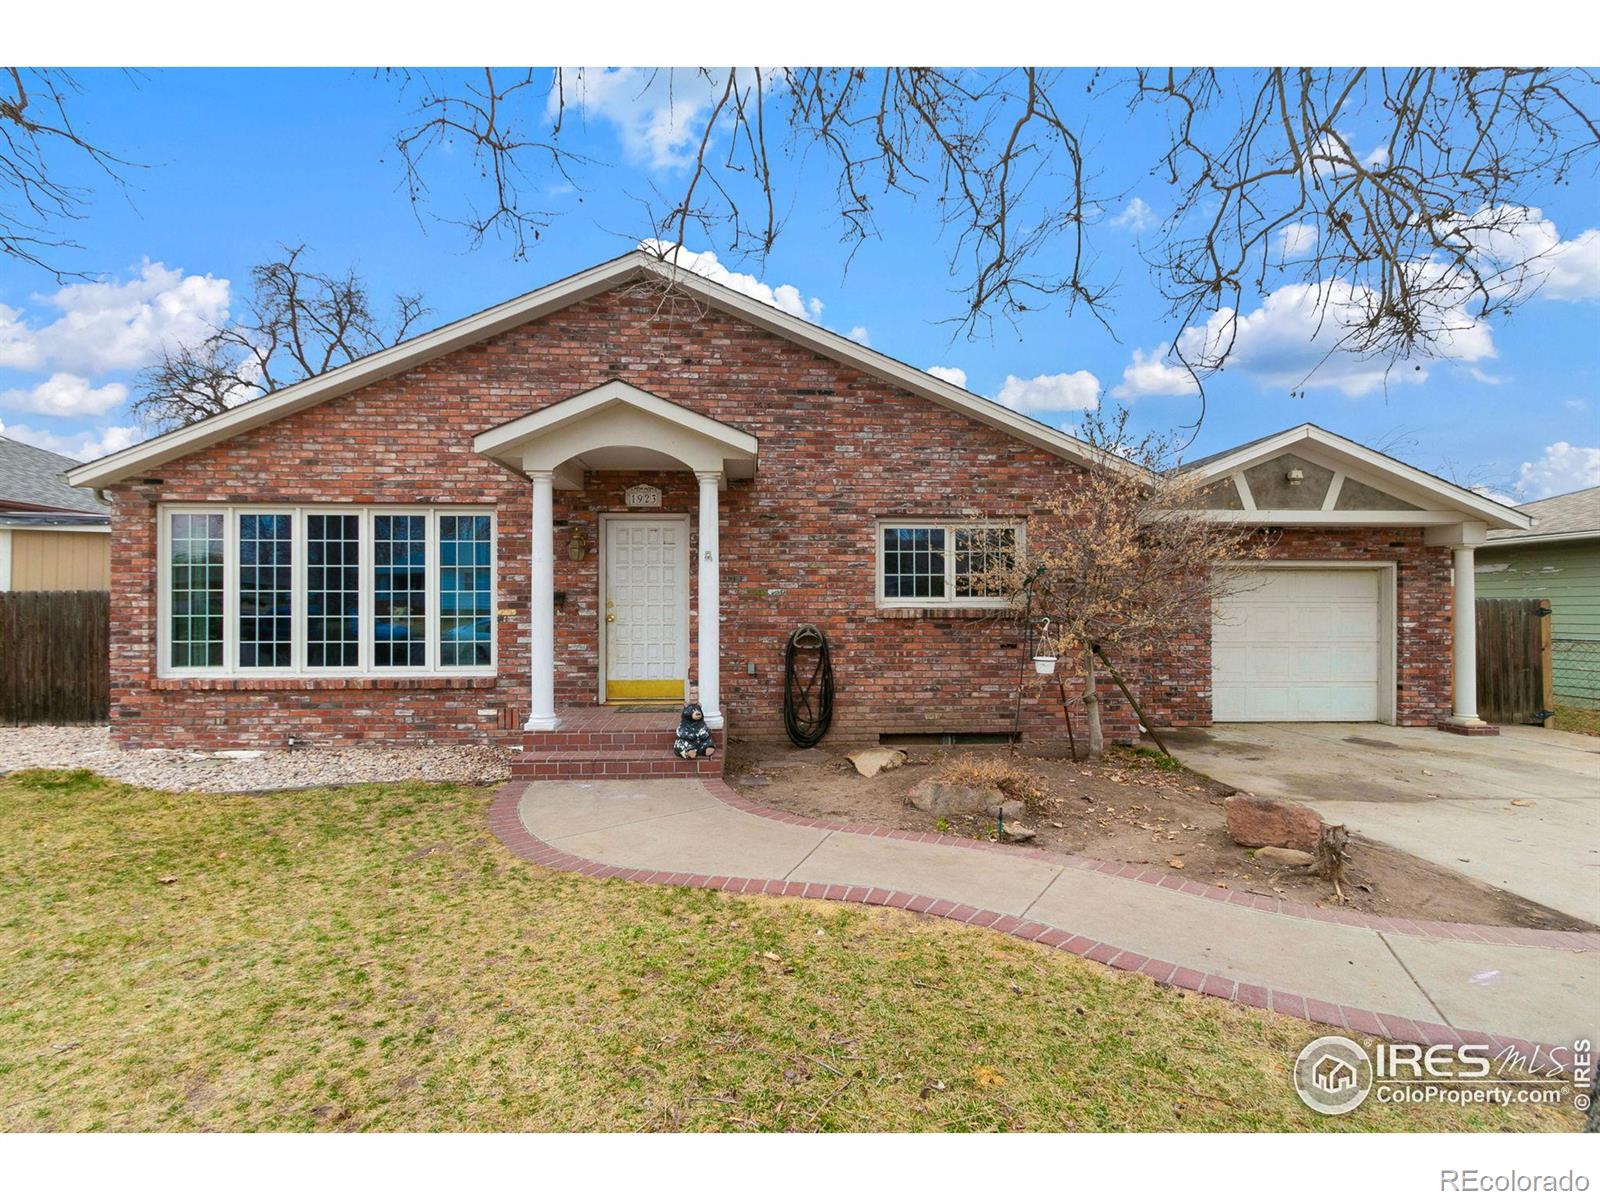 1923  14th St Rd, greeley MLS: 4567891004953 Beds: 5 Baths: 2 Price: $415,000